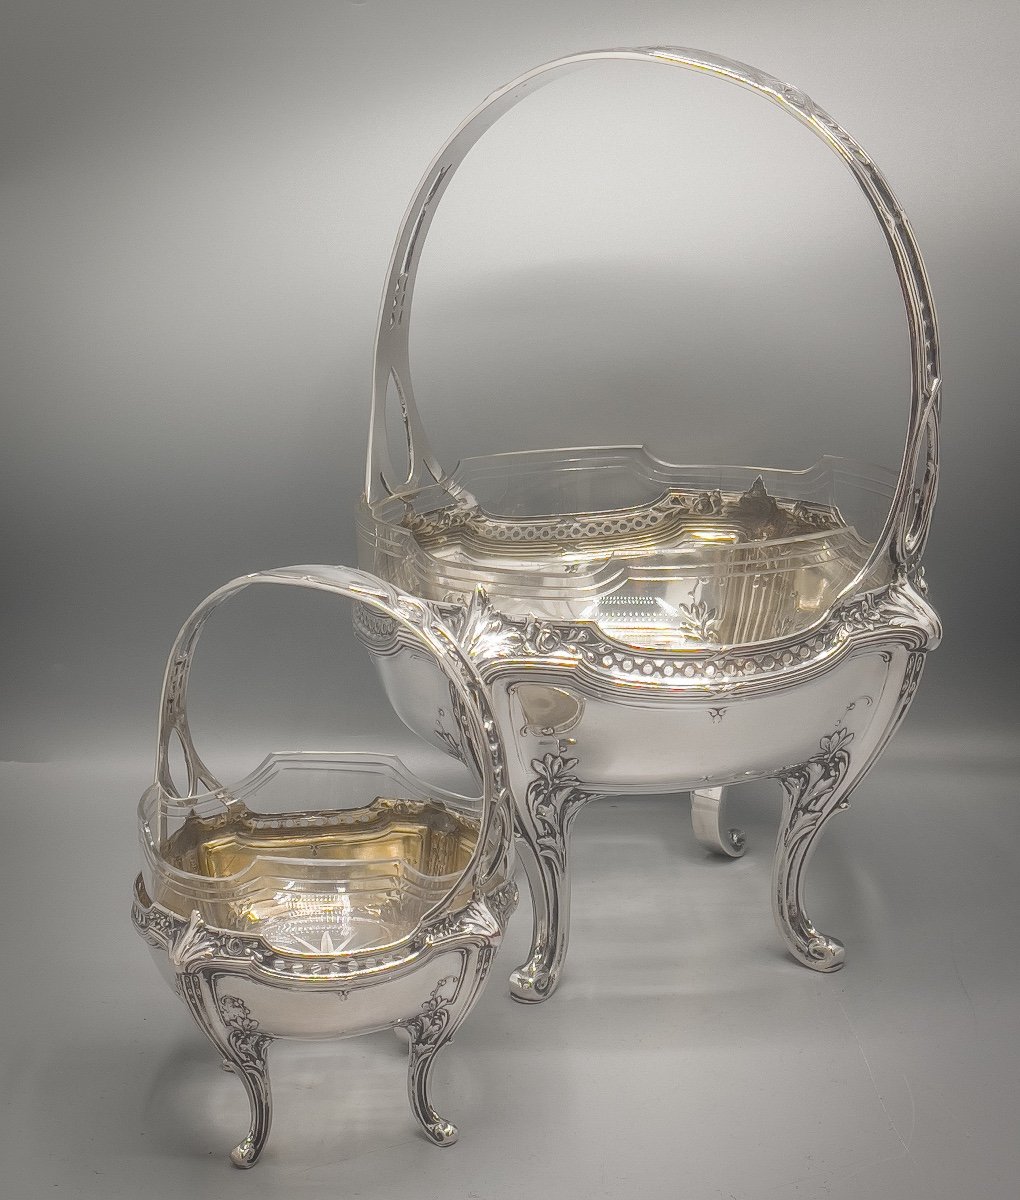 Set Of 2 Crystal And Silver Handled Baskets